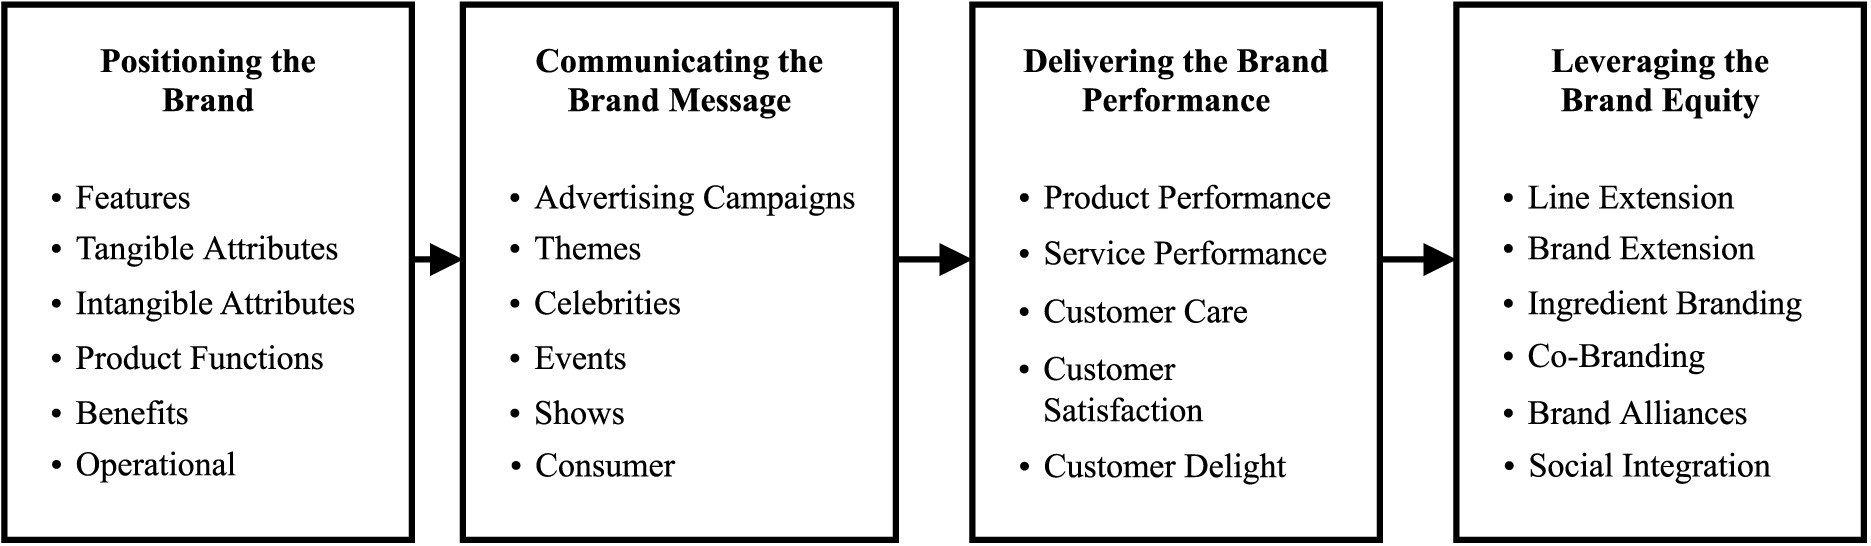 Product performance